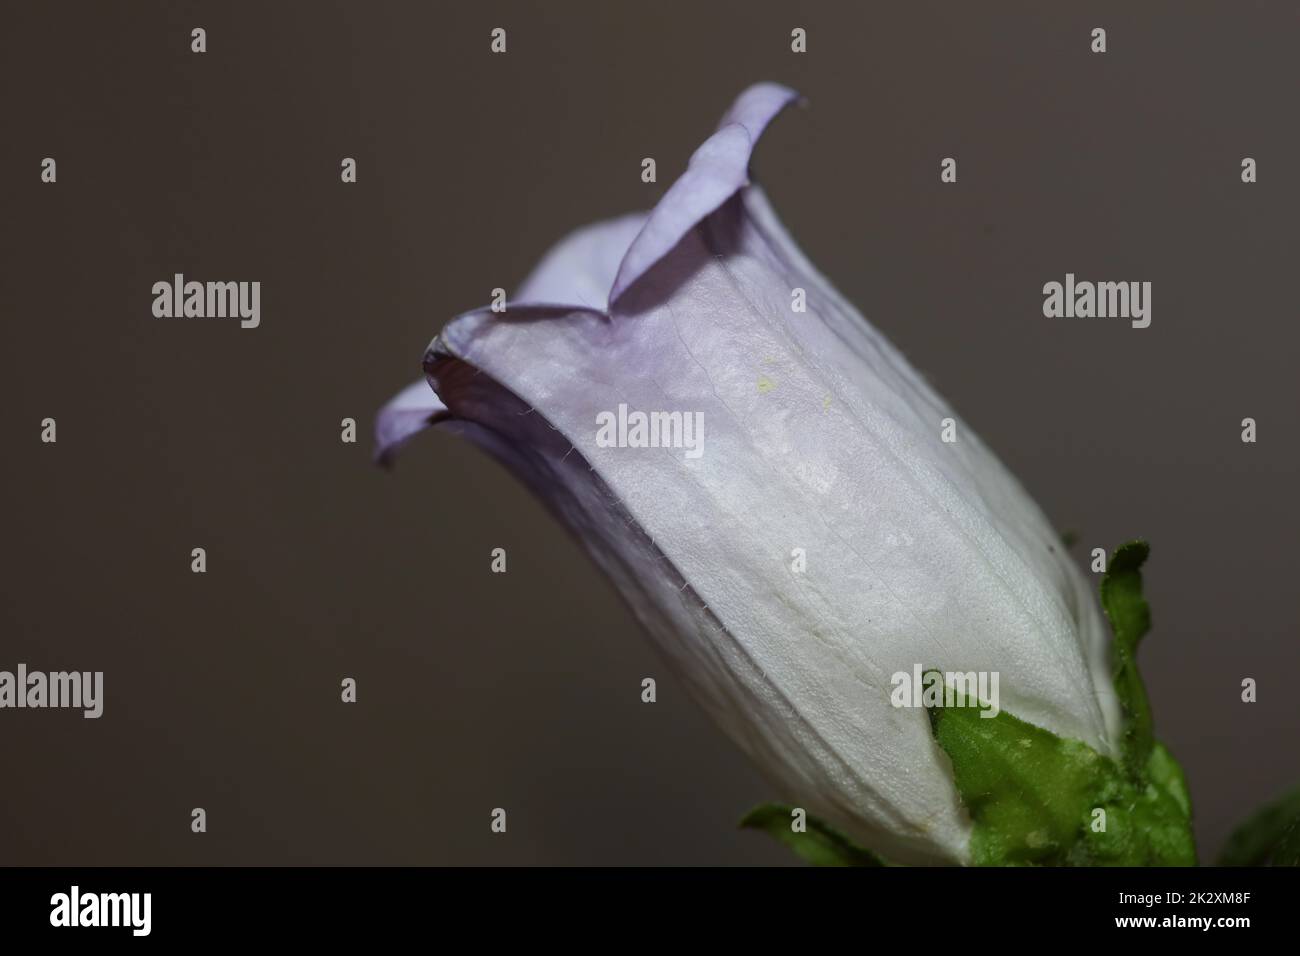 Flower blossom close up Campanula medium family campanulaceae high quality big size prints shop wall posters home decor natural plants Stock Photo